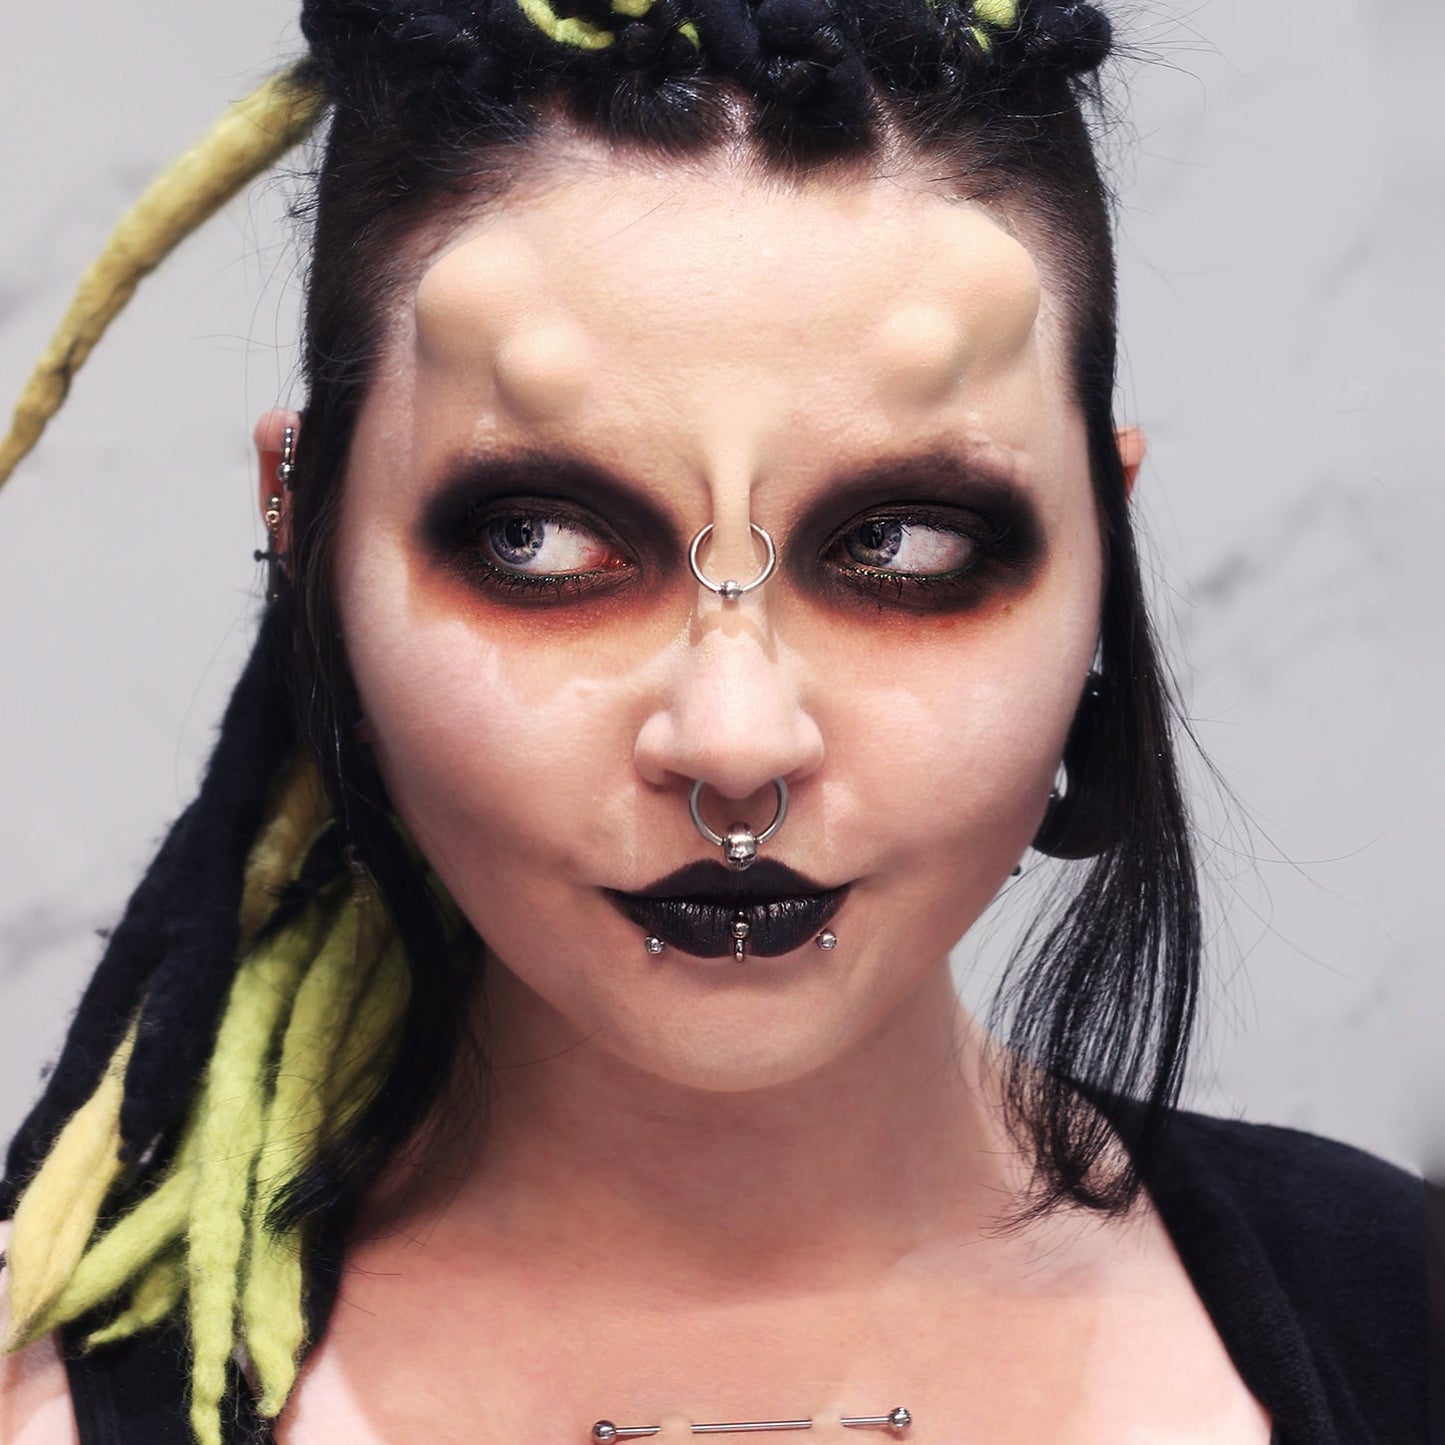 Woman with double subdermal horns and dark makeup